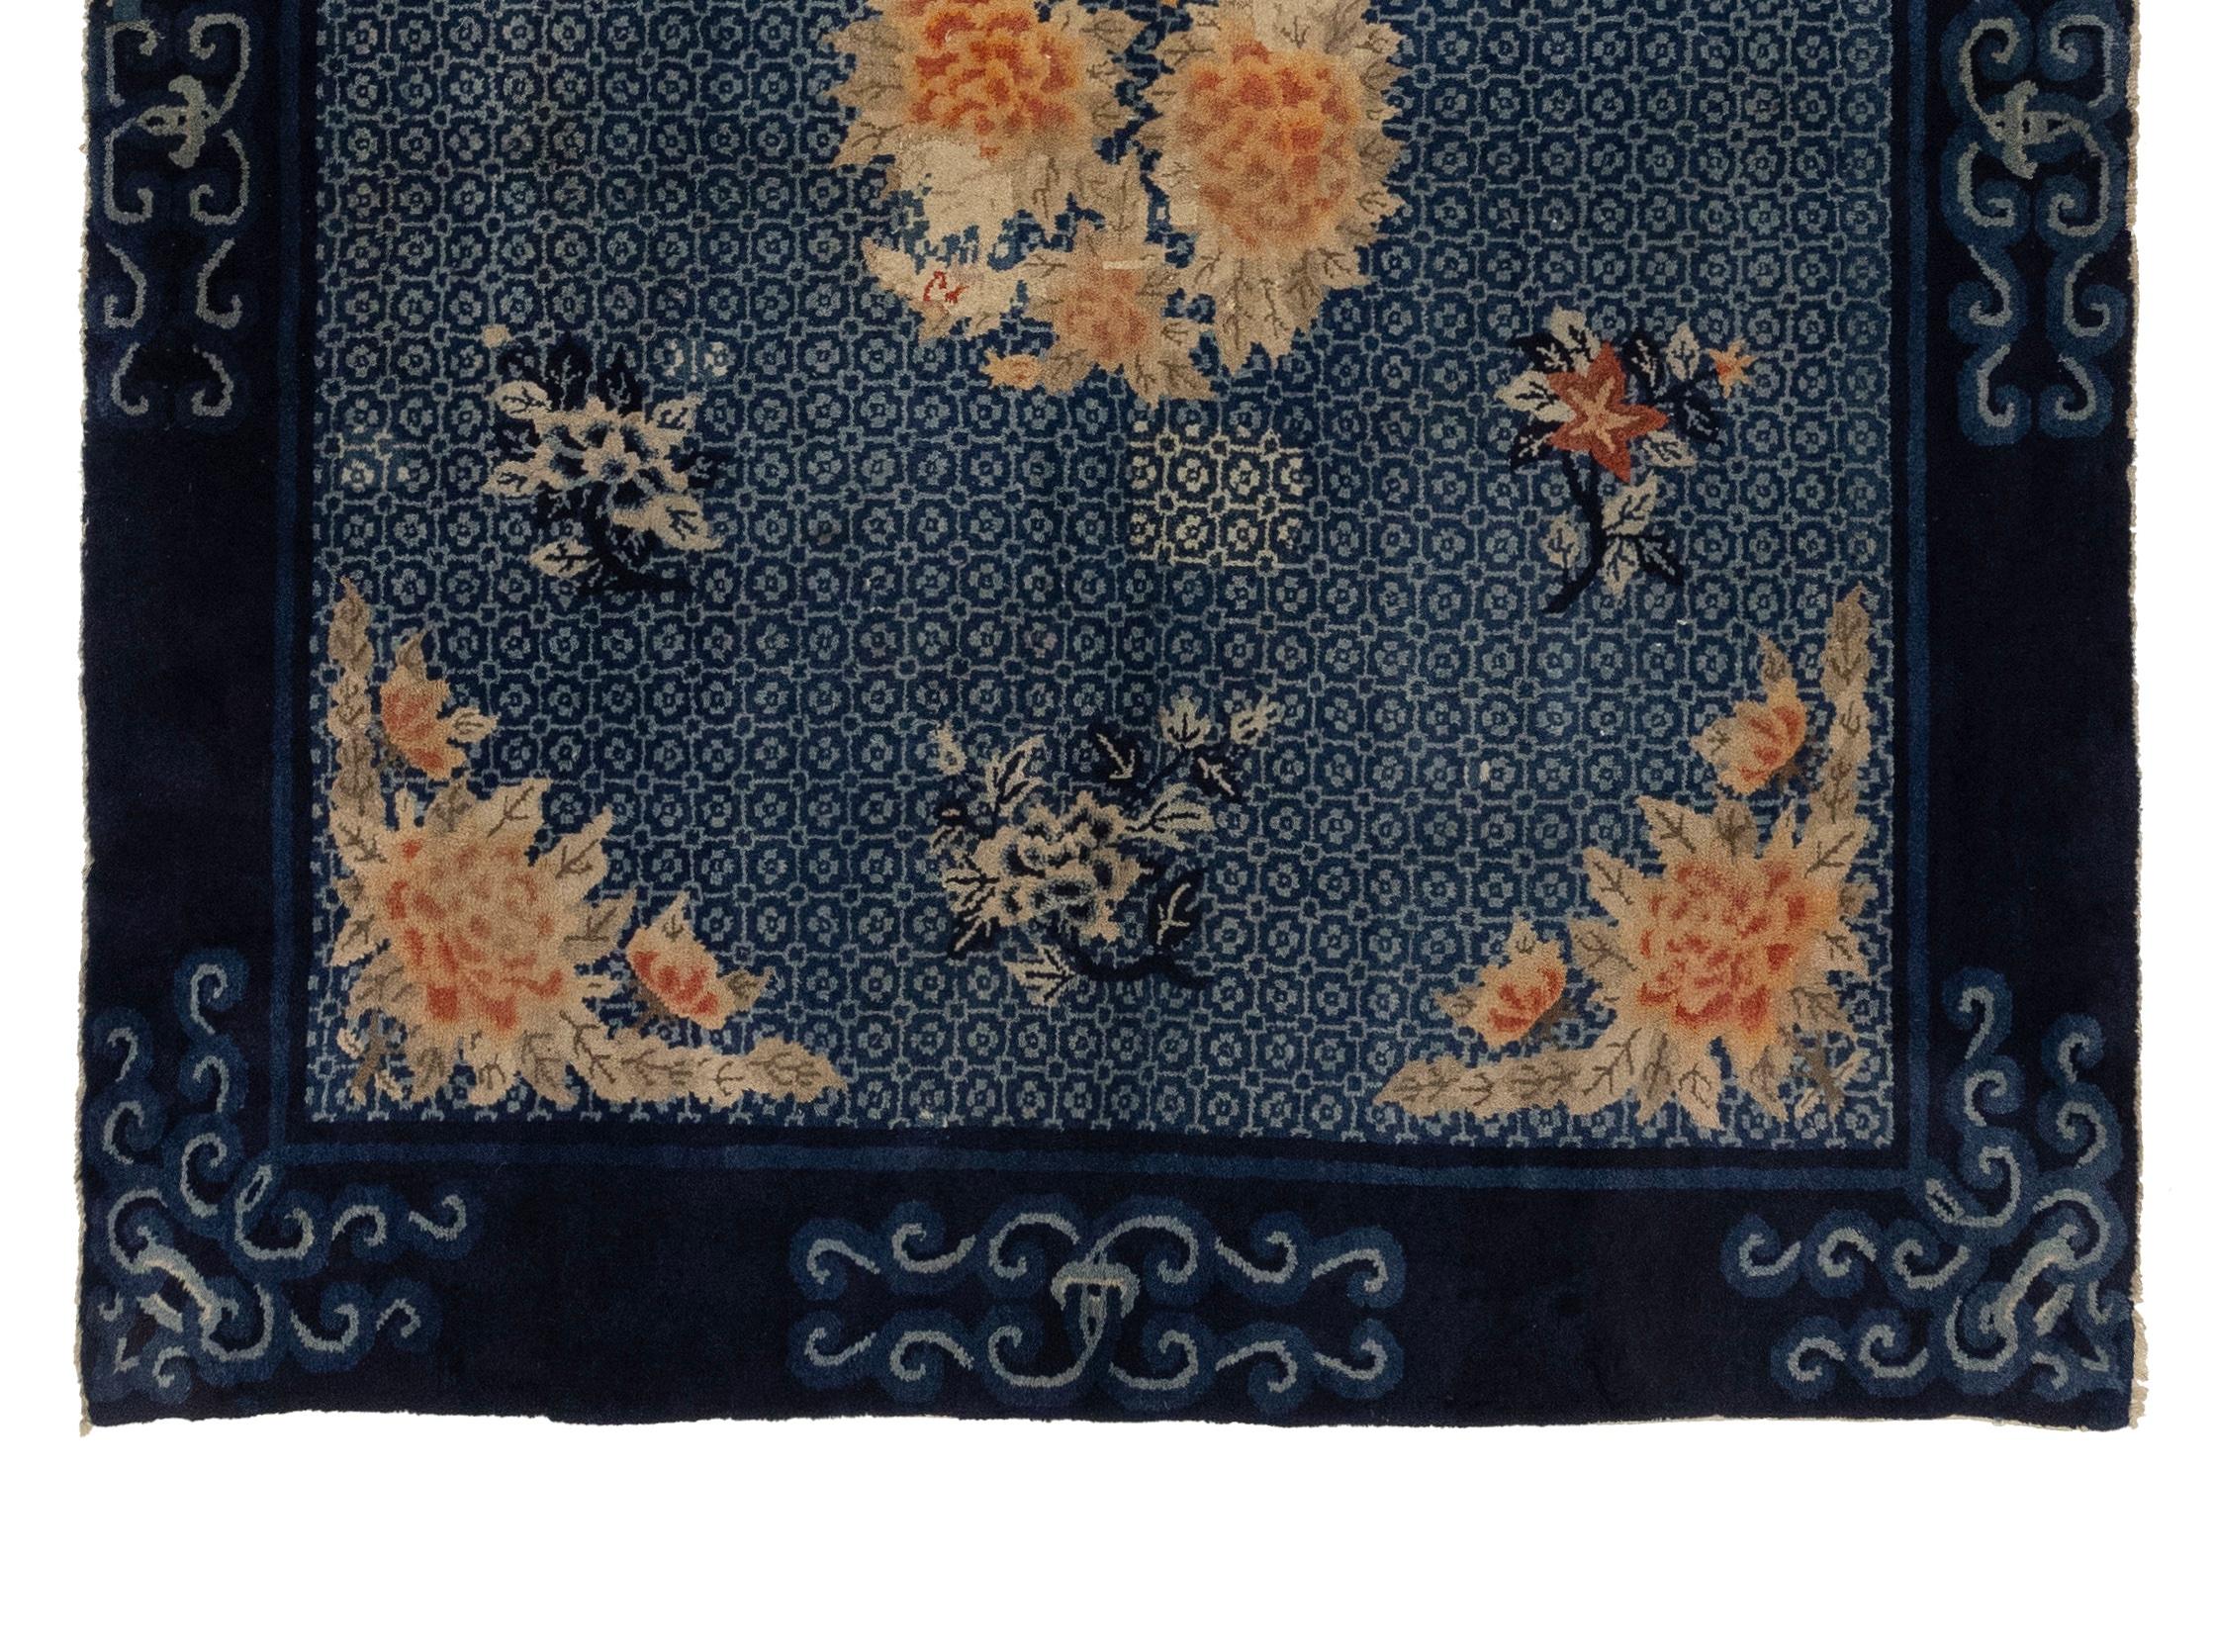 This carpet was woven in the city of Baotou, in what is now Inner Mongolia. The rugs produced in this region were known for their dense, plush pile, and the pictorial ones were particularly coveted. Images were chosen for a symbolic as well as